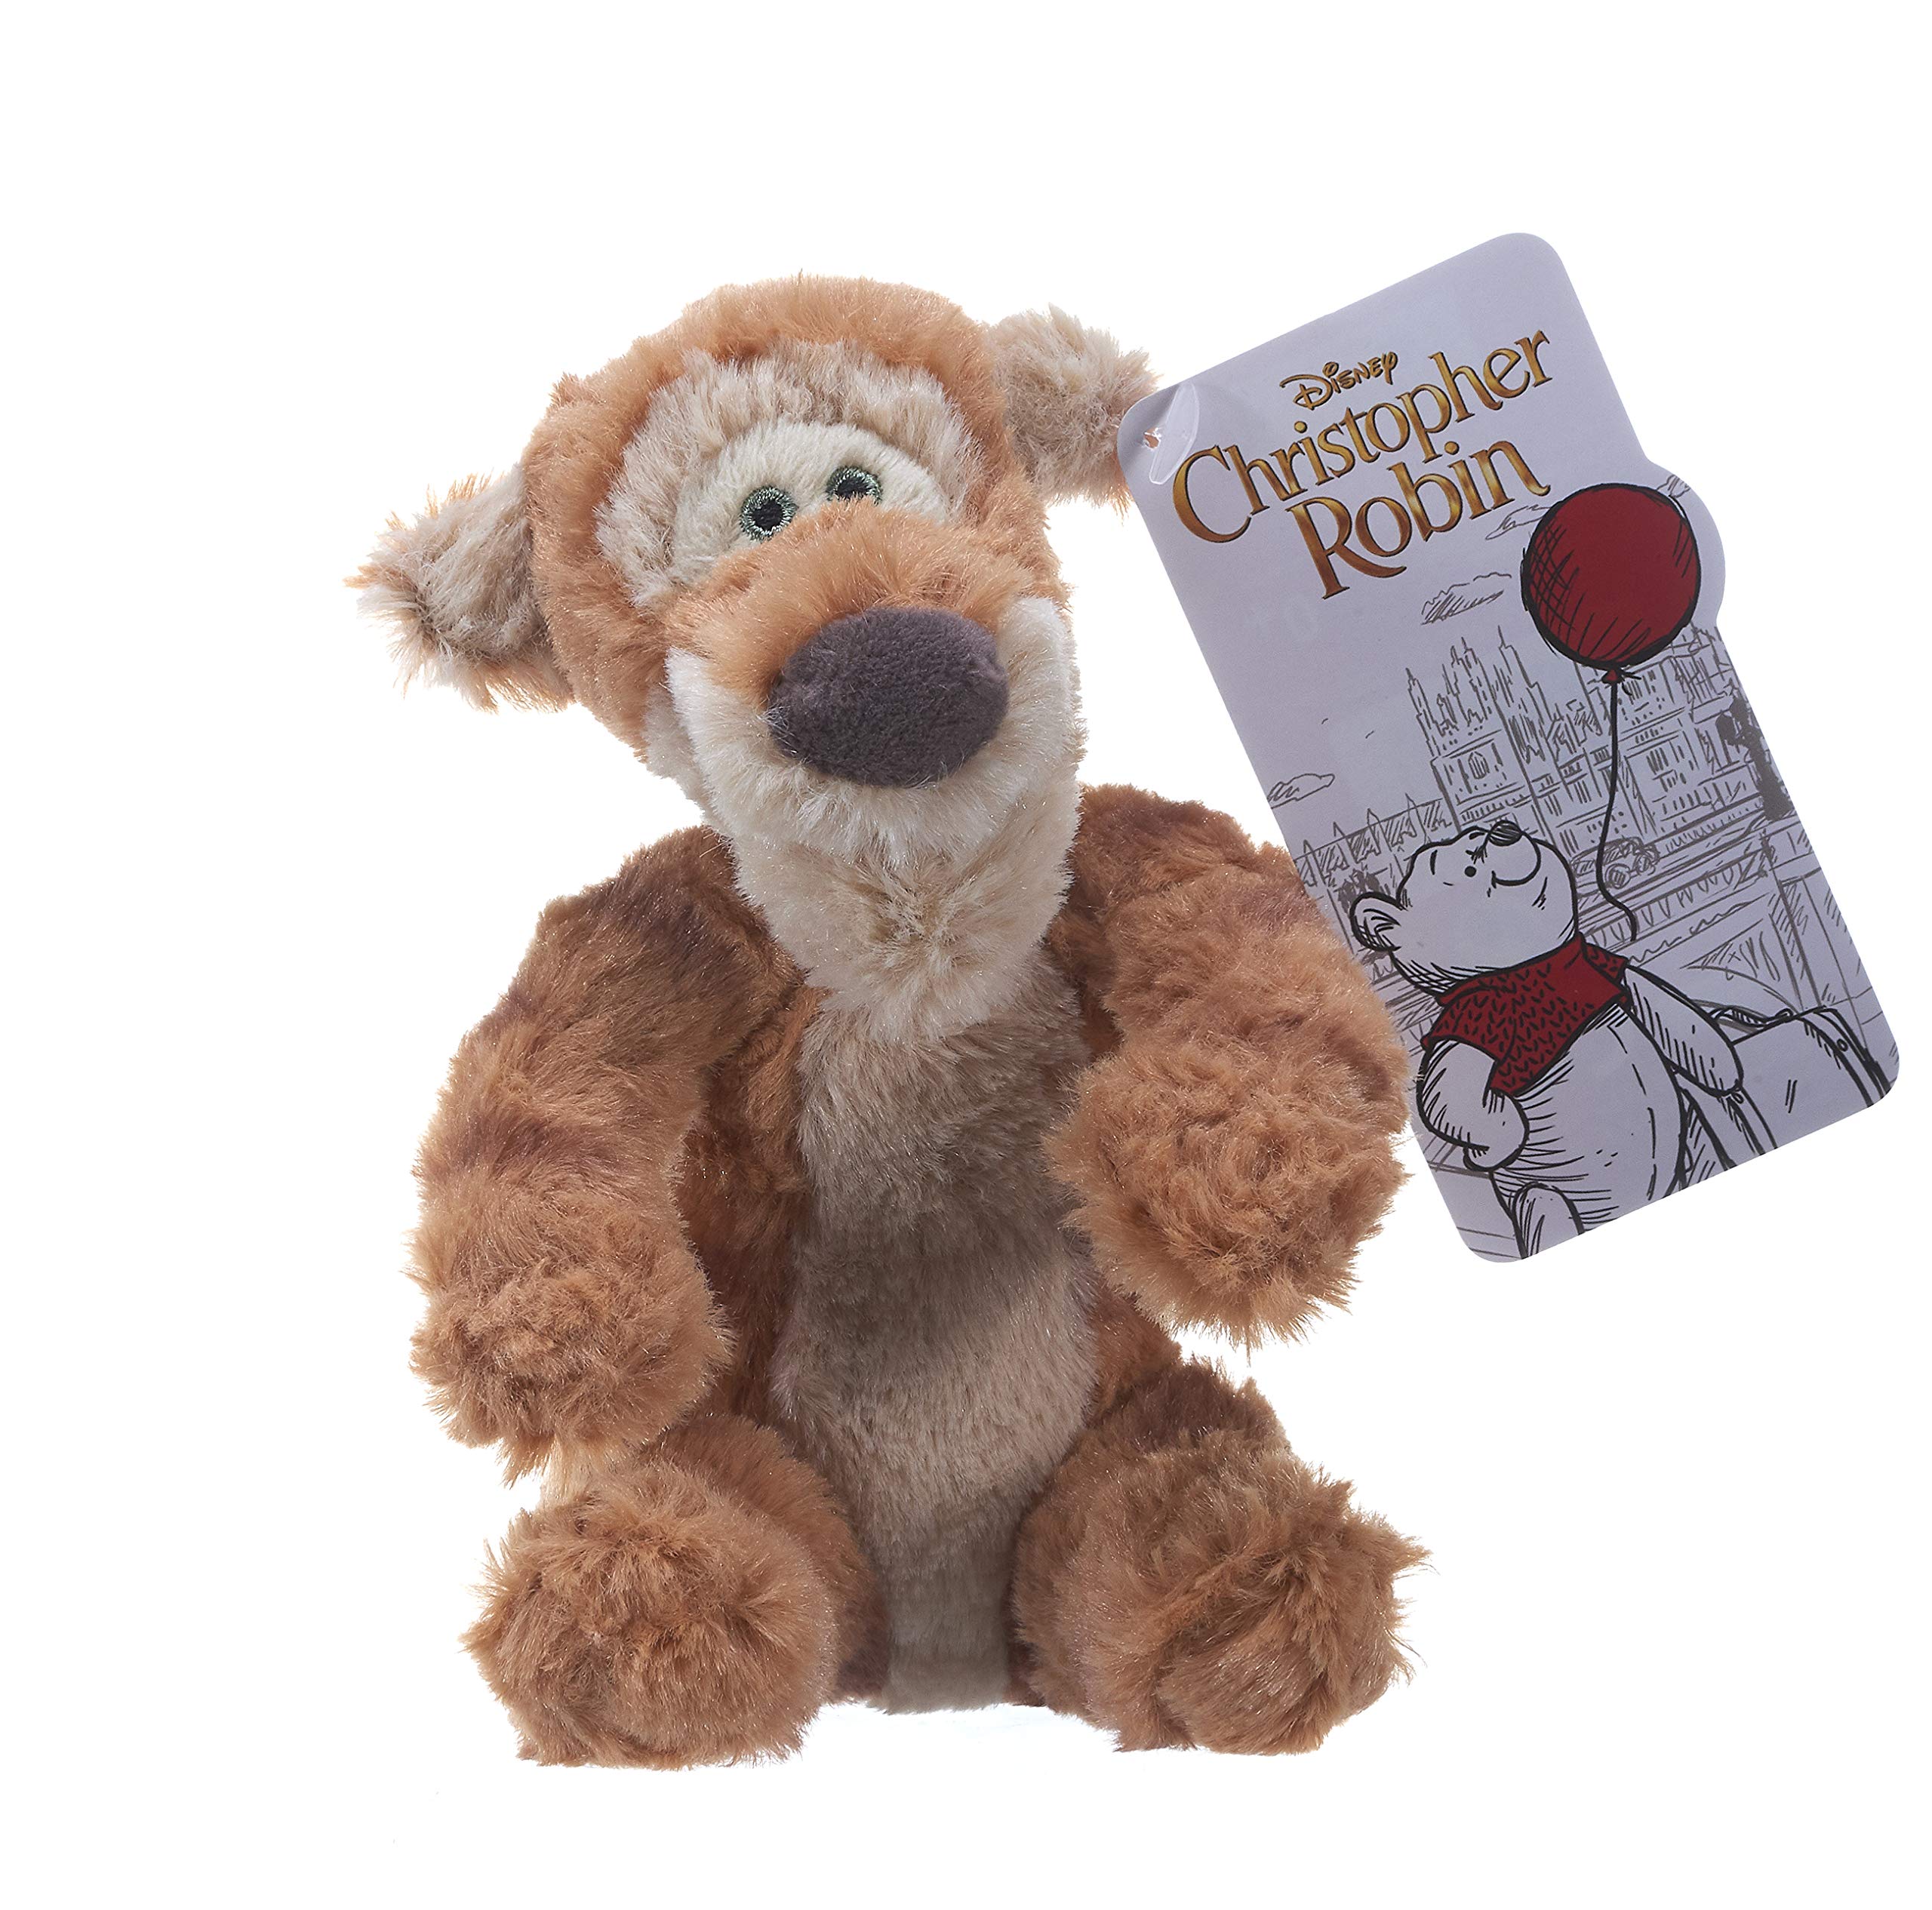 christopher robin collection plush